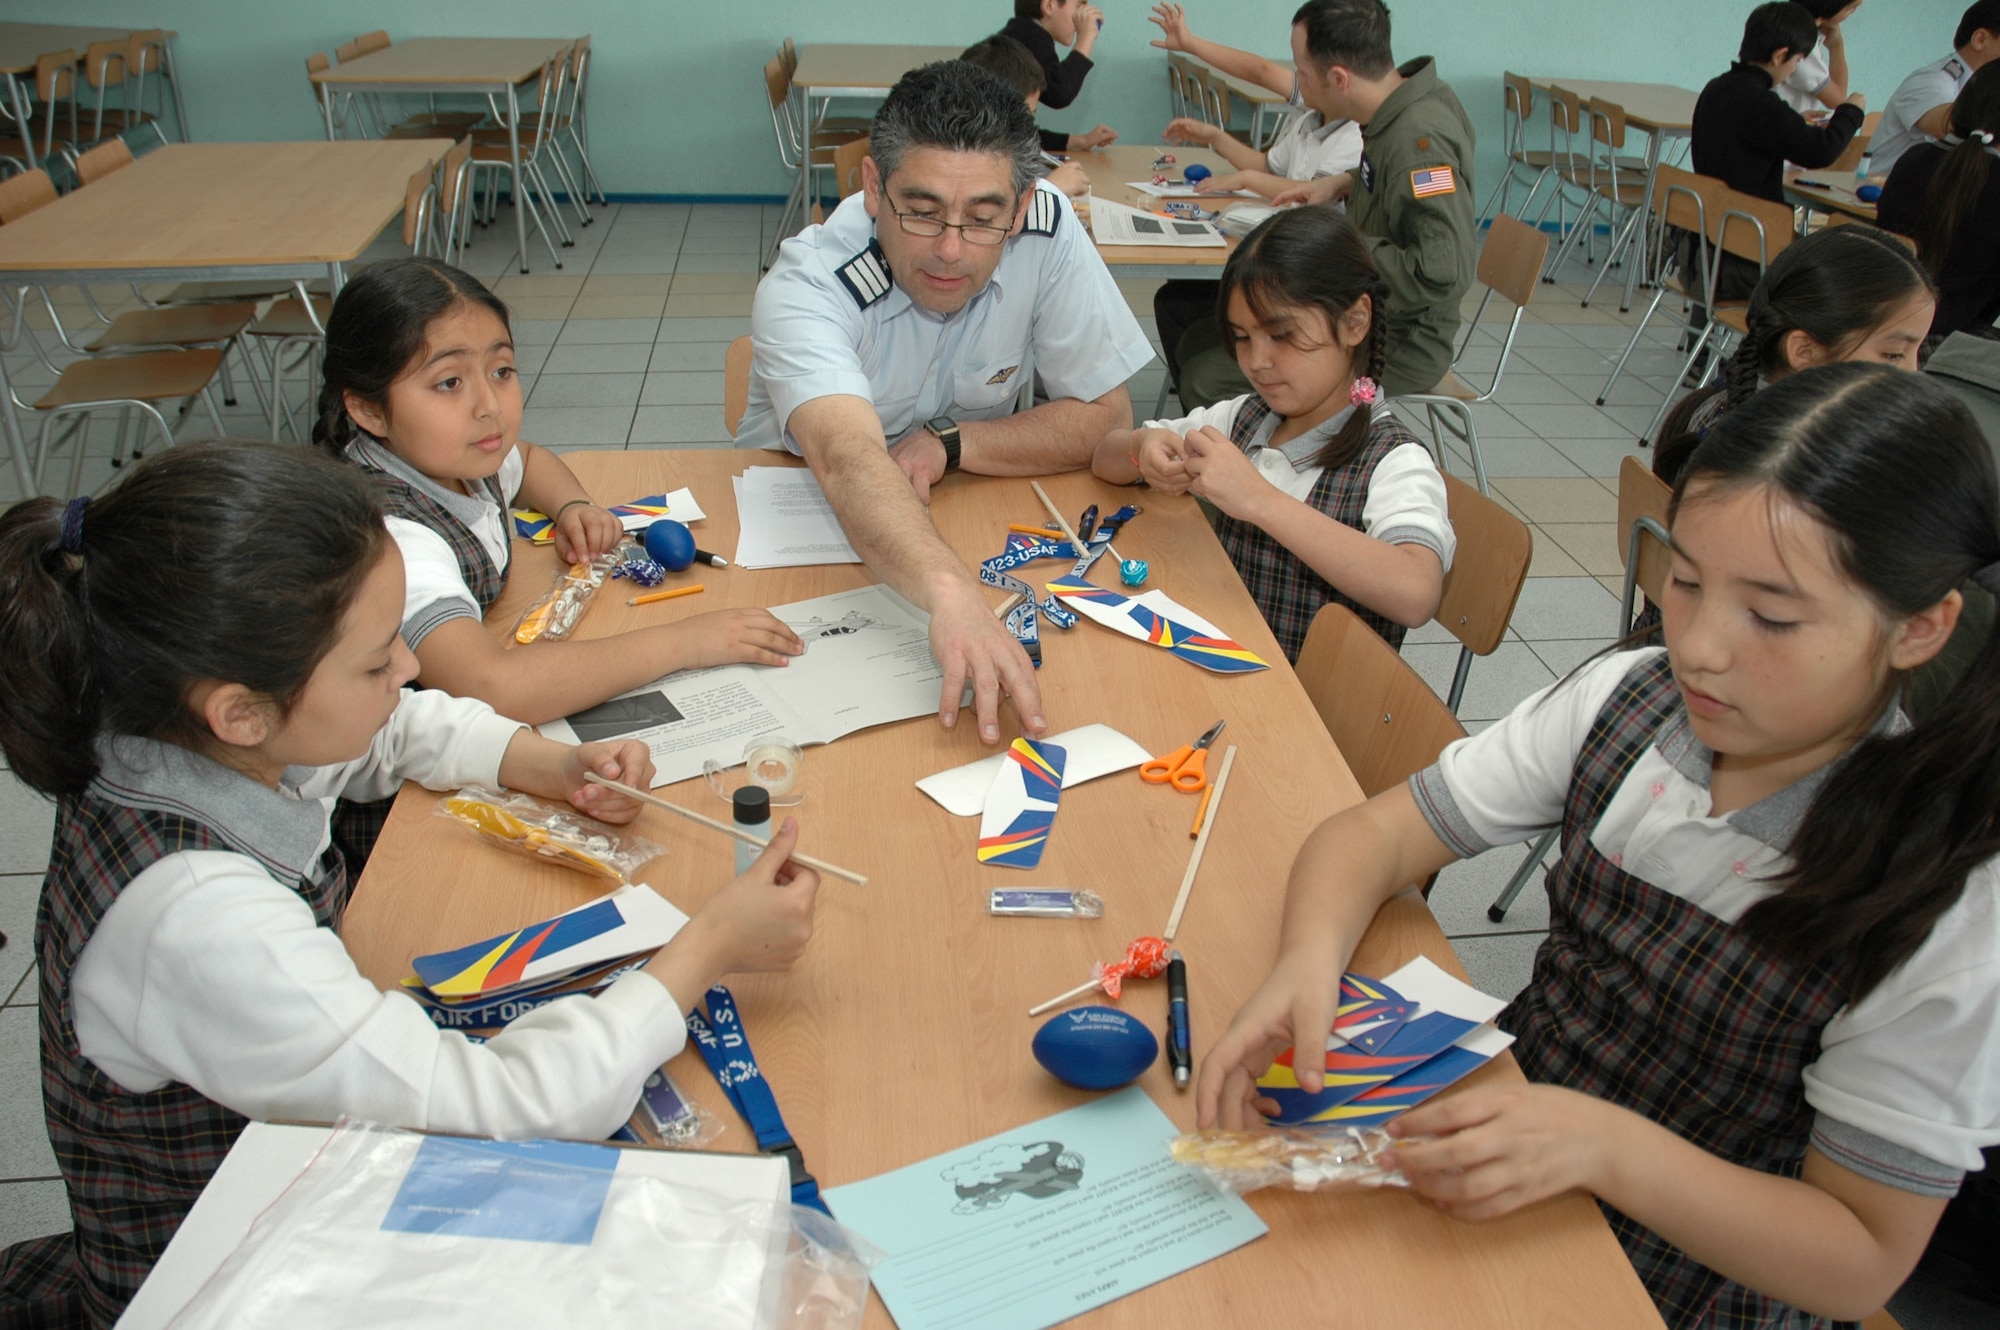 A Chilean air force officer assists a group of students at the Complejo Educacional Esperanza School in Santiago, Chile, during a community outreach event on Oct. 27. The model airplane kits were donated by a Silicon Valley technology company for use with Operation Southern Partner, an Air Forces Southern-led exchange aimed at providing intensive, periodic subject matter exchanges with partner nations in the U.S. Southern Command area of focus.  Included in the exchange is visits like this one where Airmen partnered with local U.S. Embassy volunteers, Chilean air force officers, members of the U.S. Military Group and volunteers from Agilent Technologies to teach children about the practical applications of the sciences.  (U.S. Embassy photo/Jose Nuños)